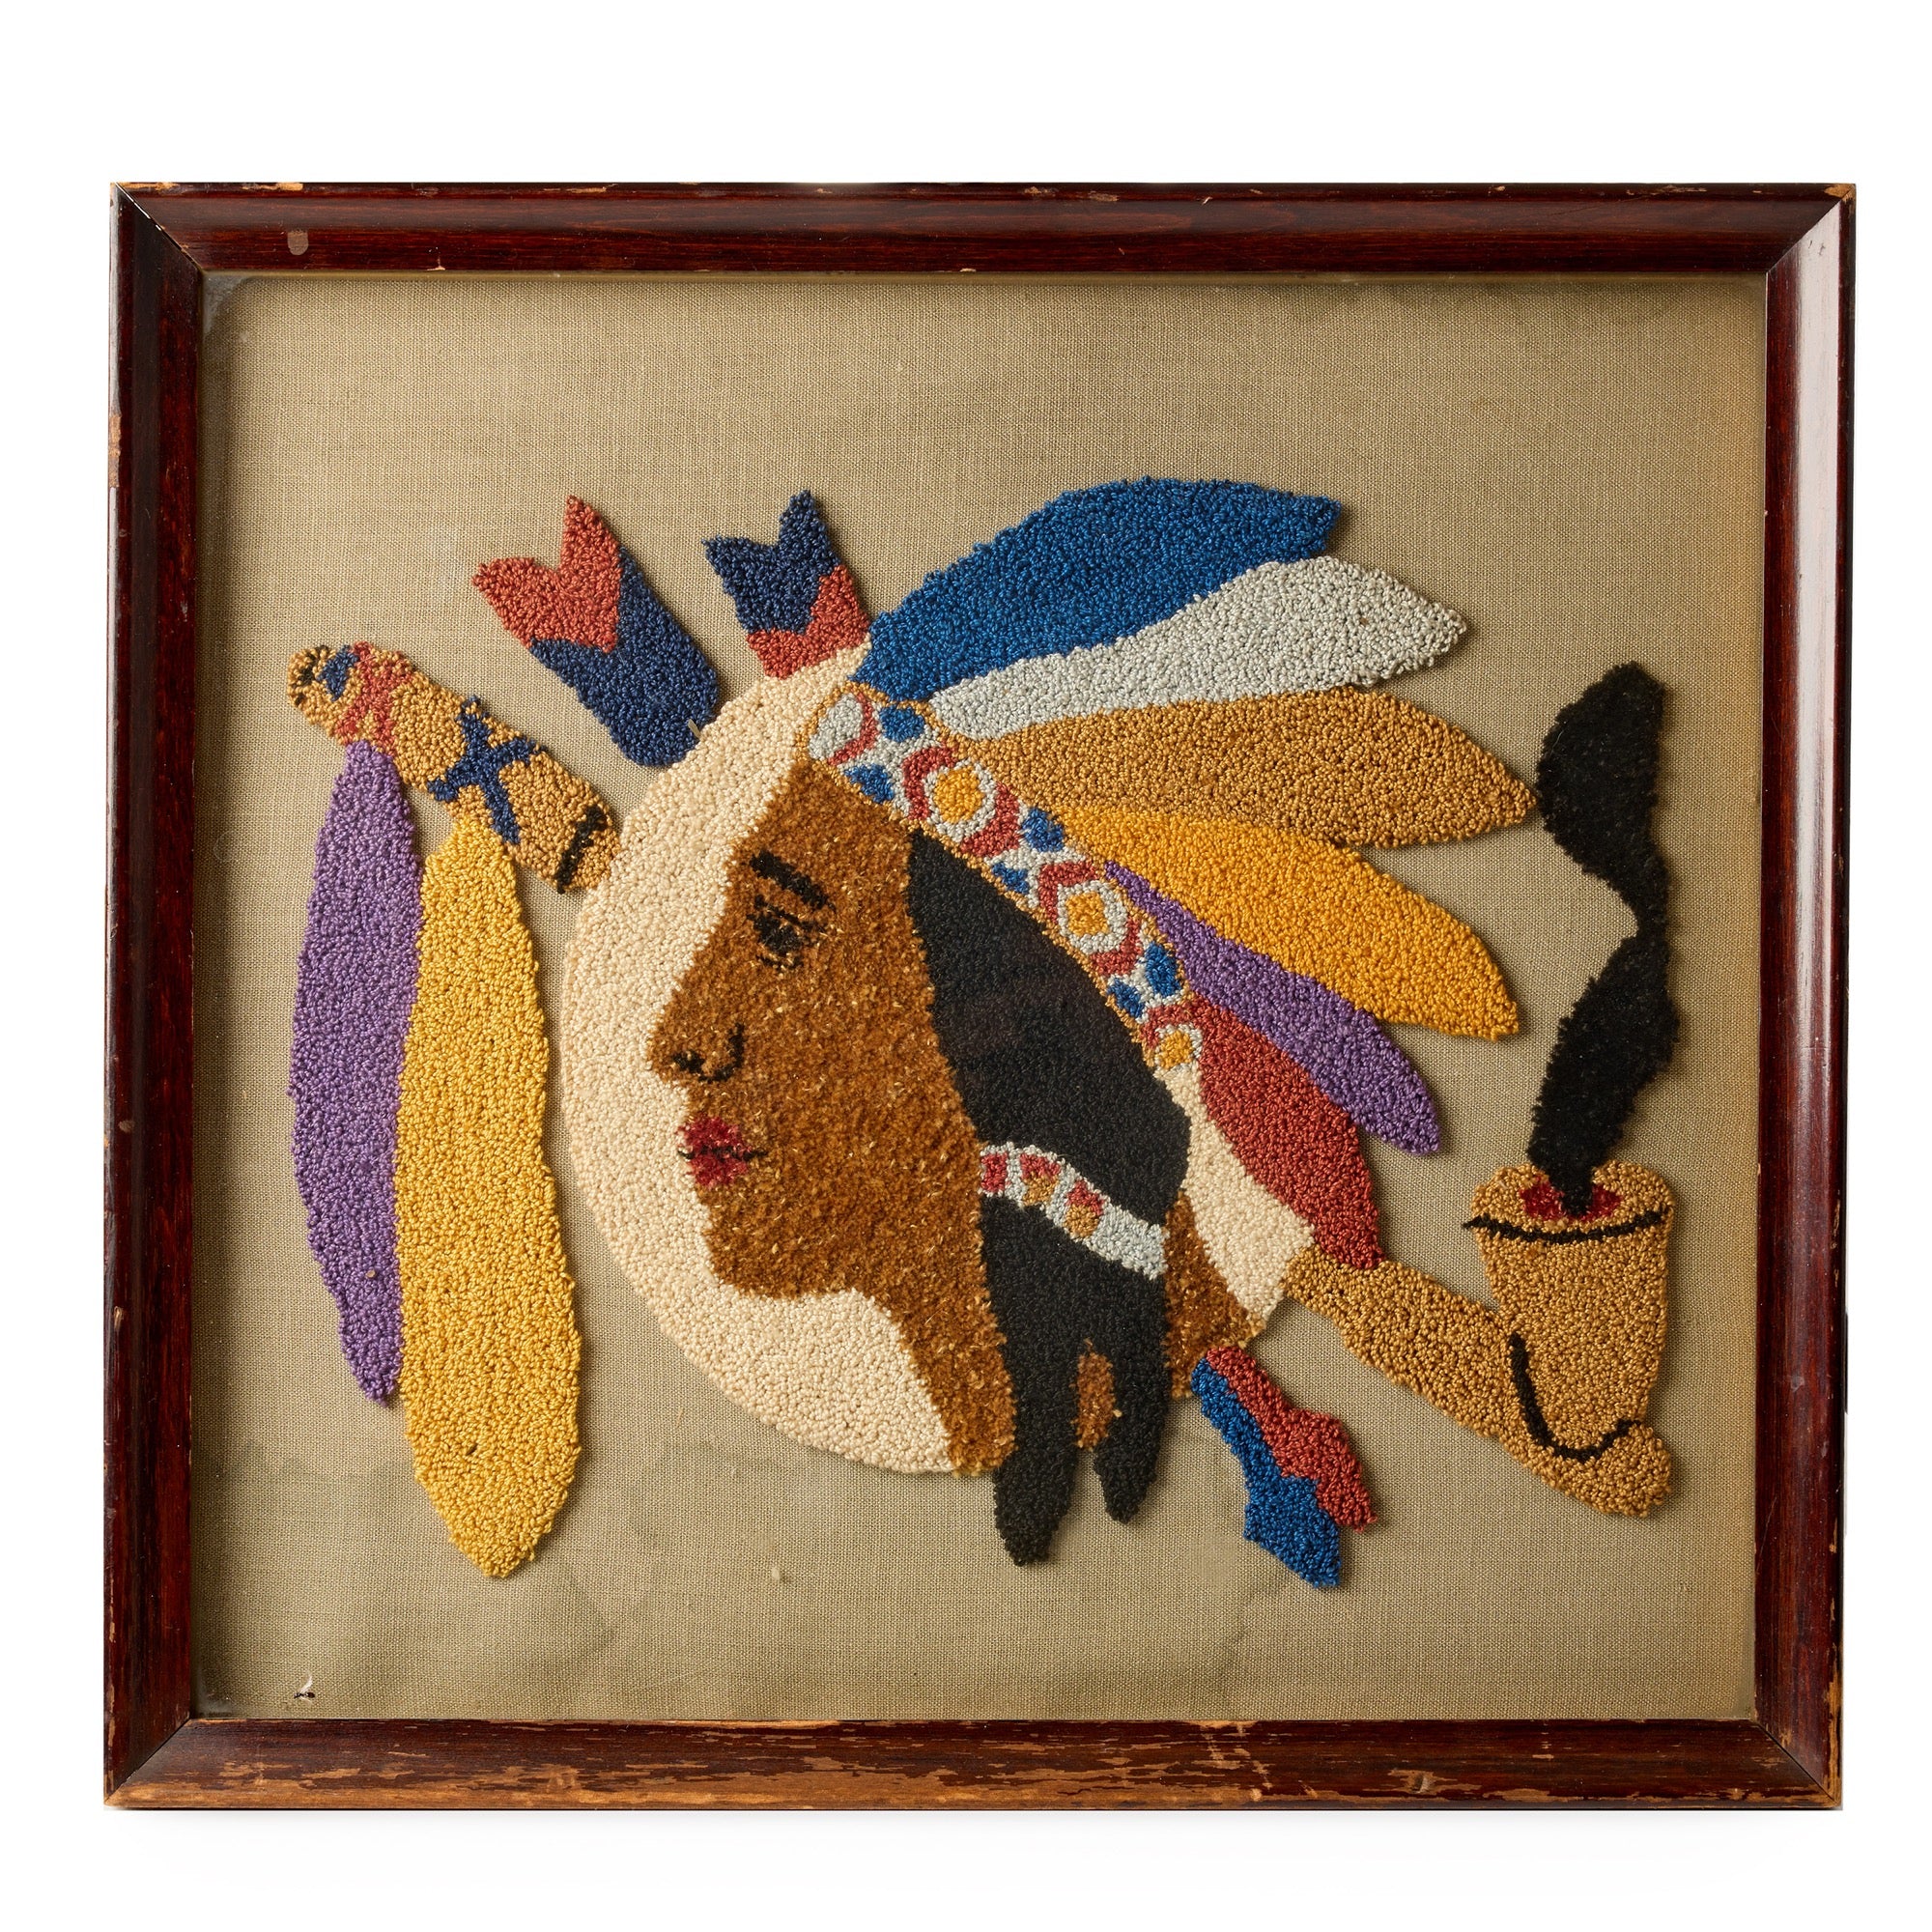 Native American Embroidery from USA